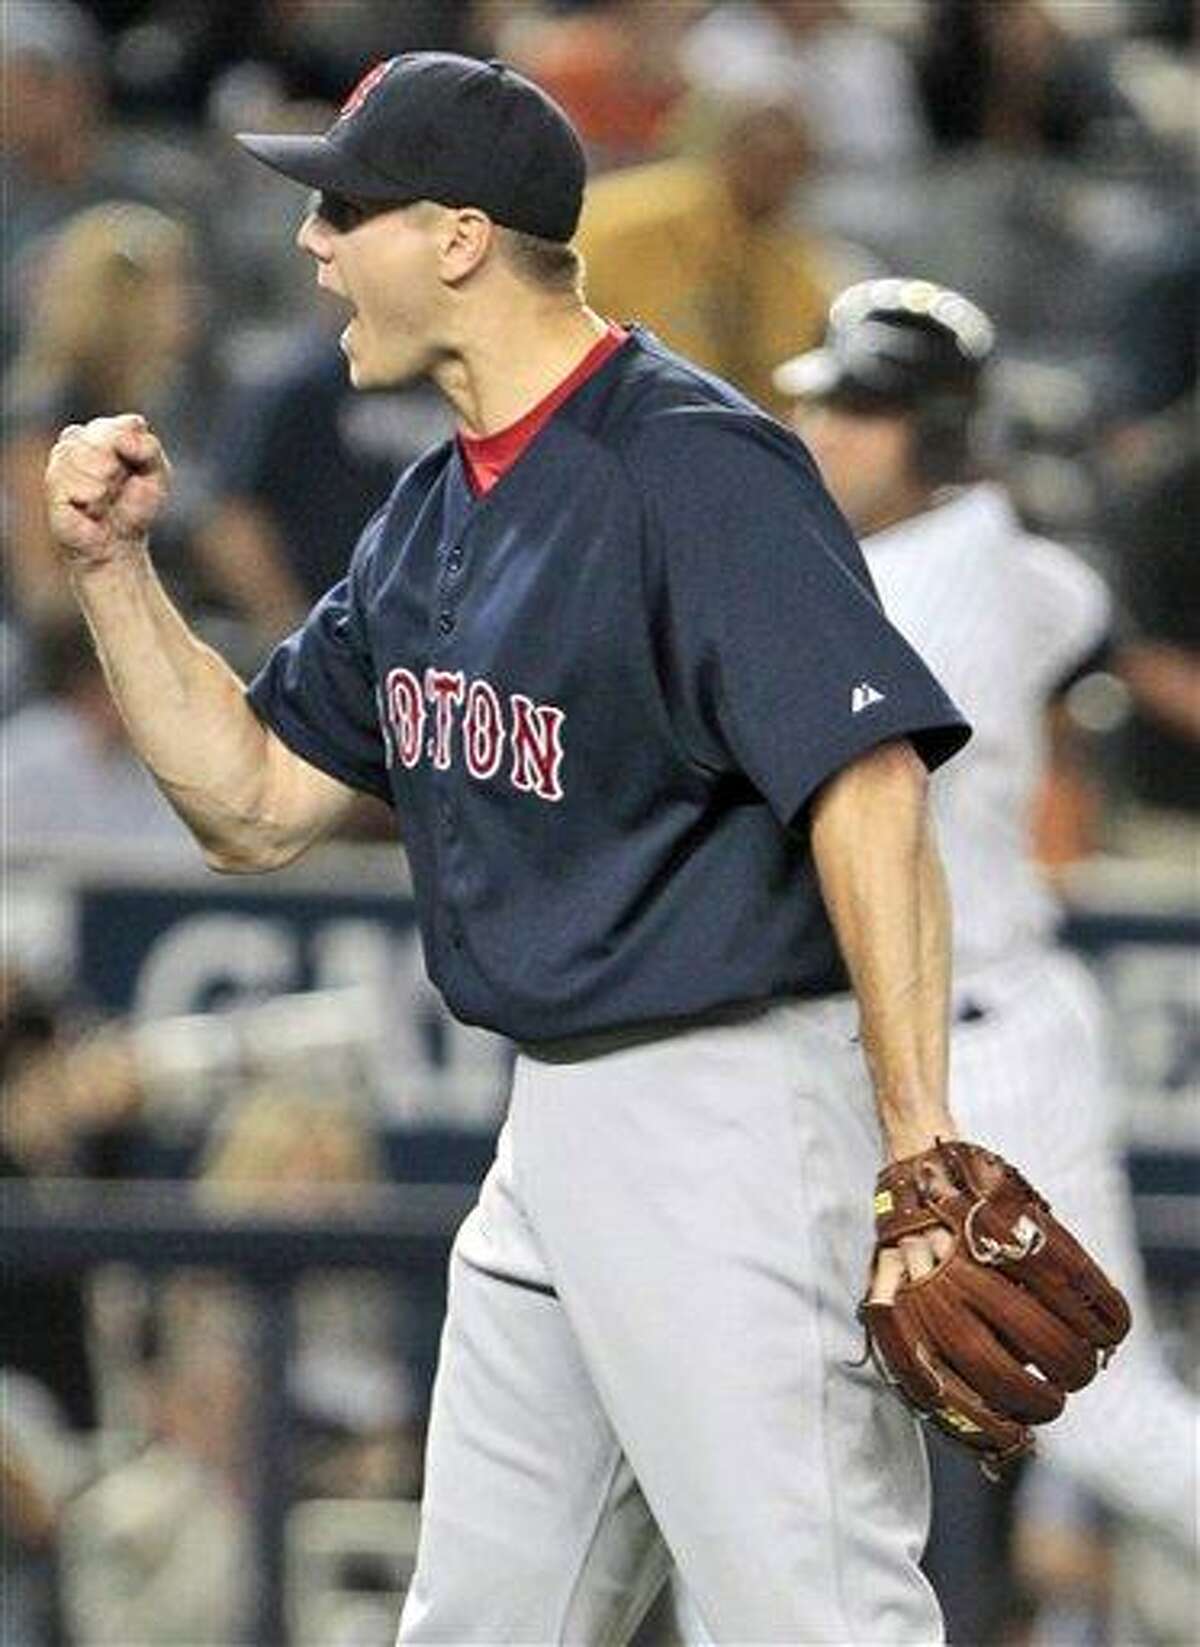 Boston Red Sox relief pitcher Jonathan Papelbon reacts after the final out of a baseball game against the New York Yankees, Friday, Aug. 6, 2010, in New York. The Red Sox won the game 6-3. (AP Photo/Frank Franklin II)